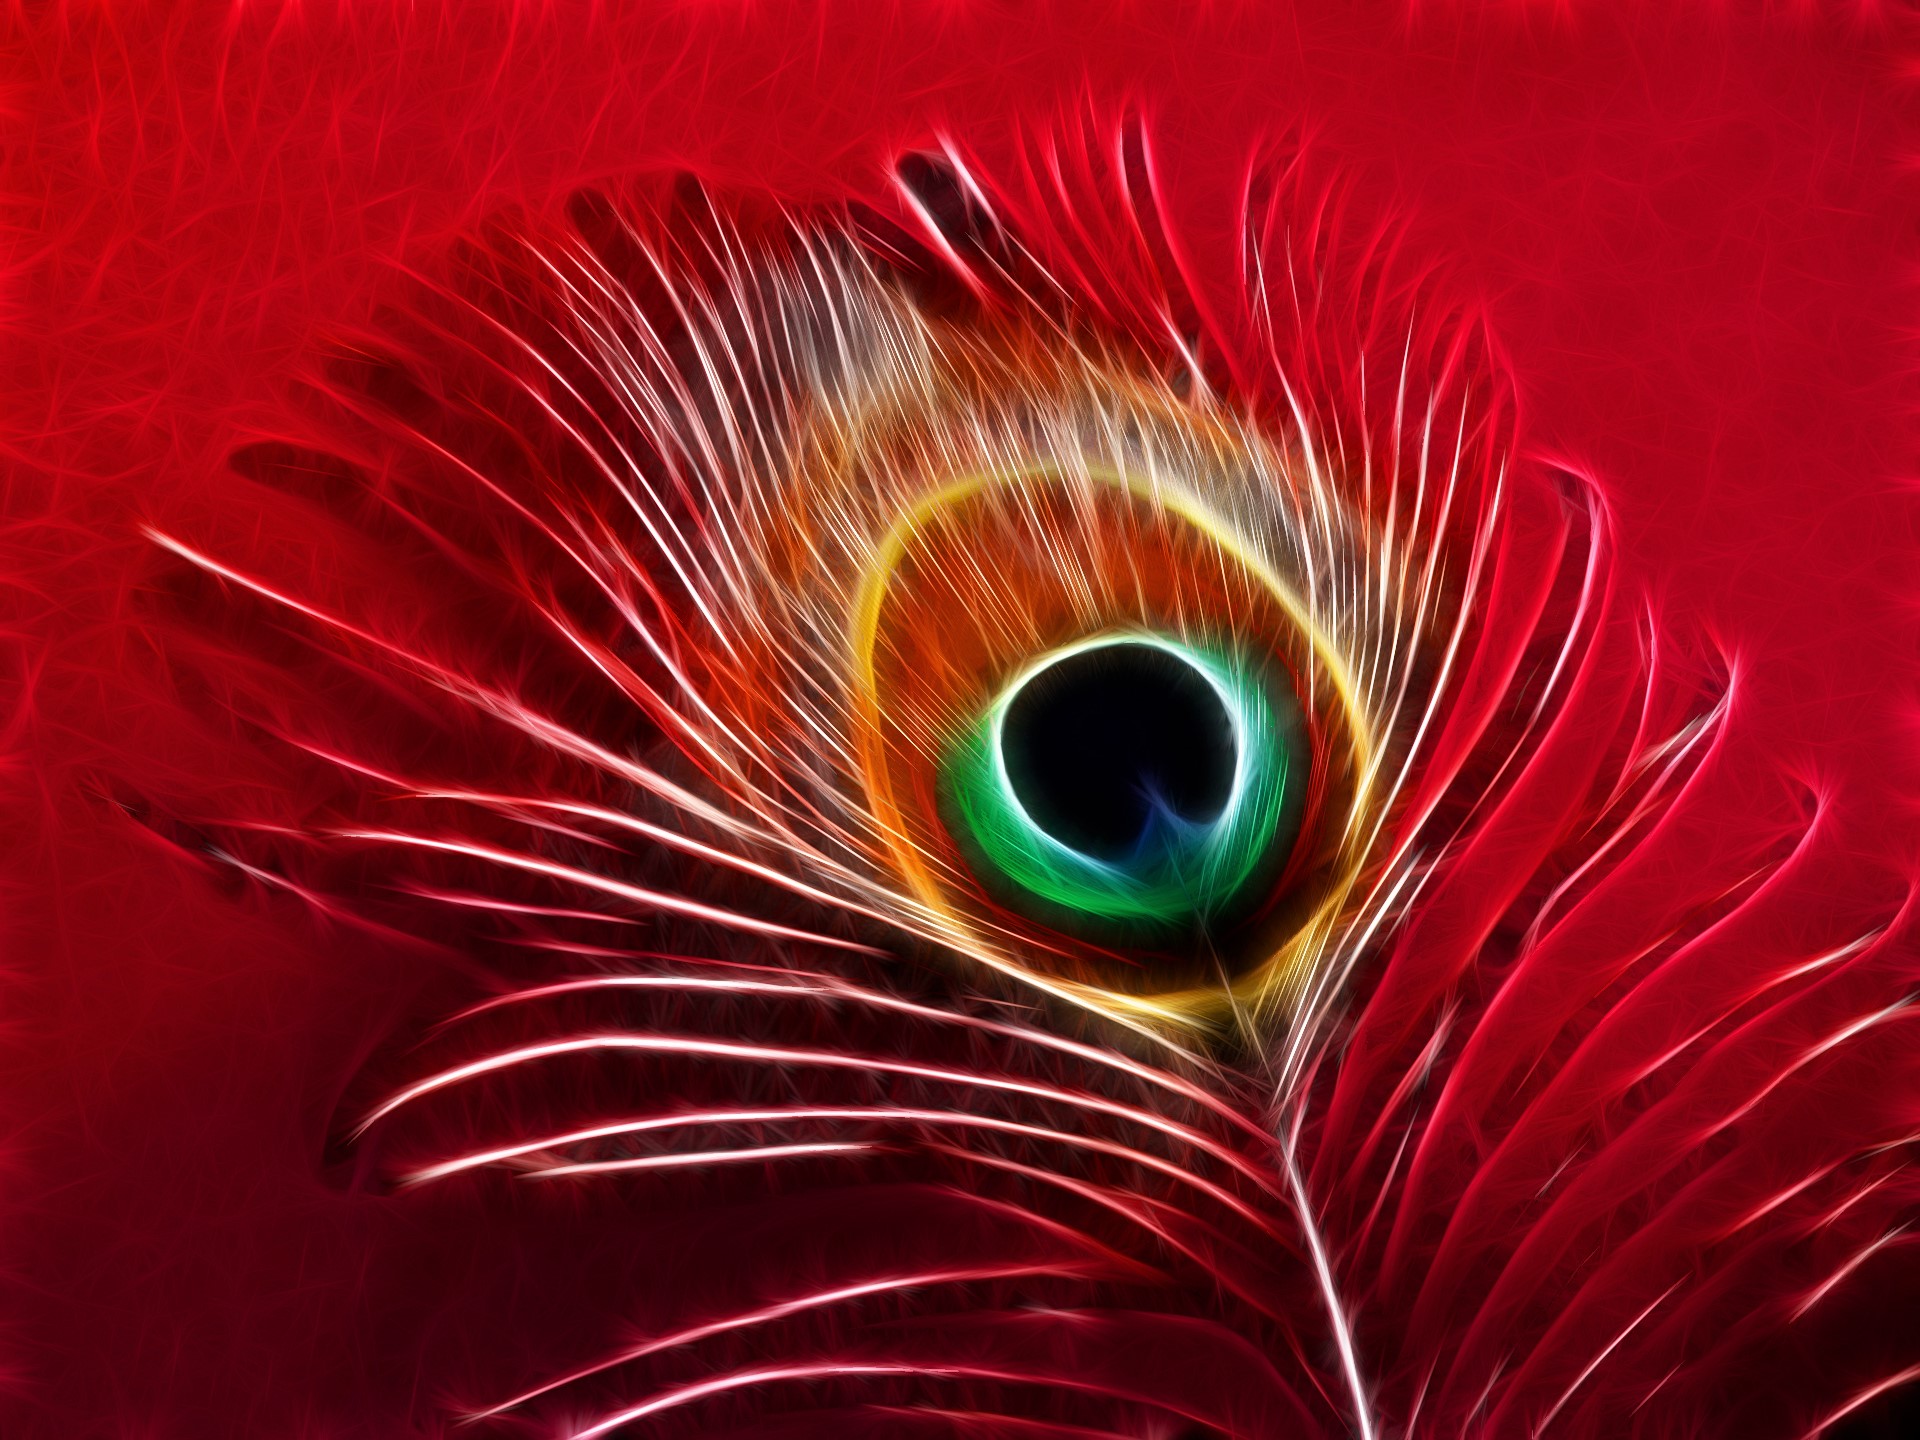 Artistic Colorful Feather Red 1920x1440